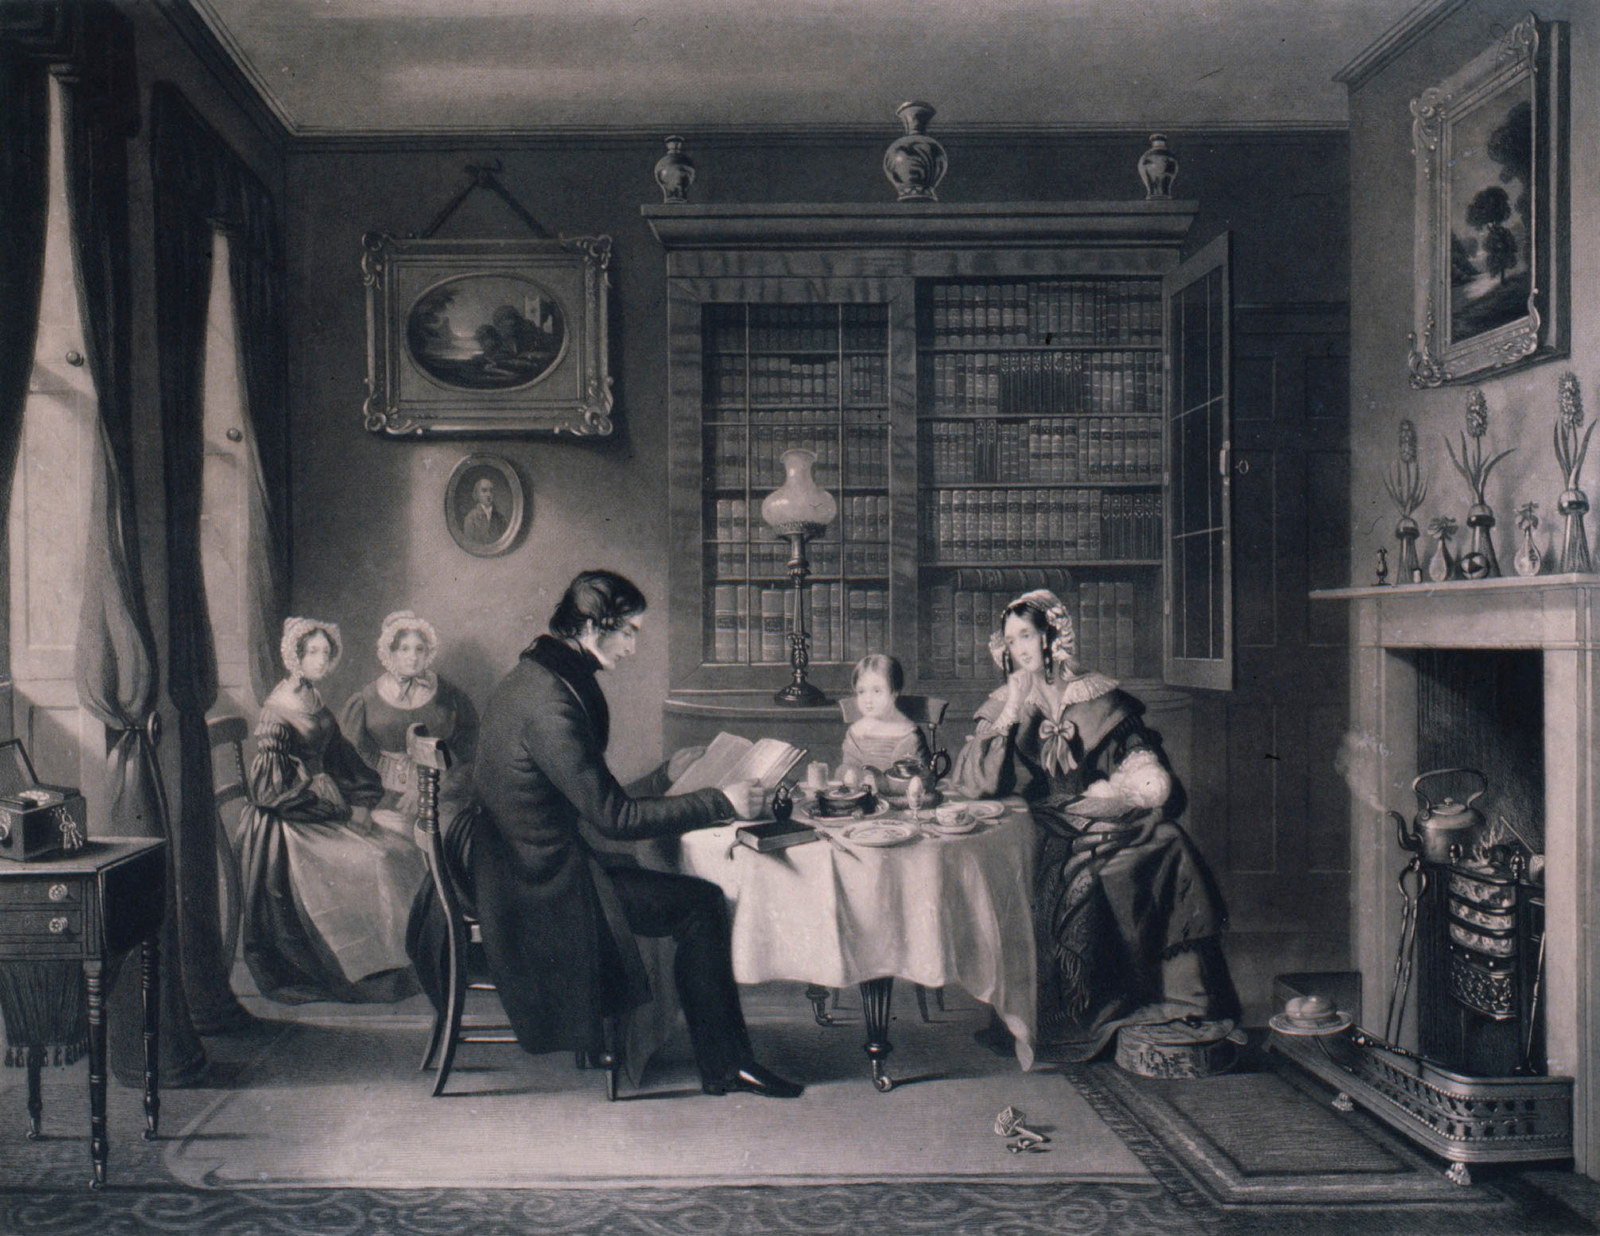 A very formal Victorian family sitting down to breakfast in a 19th century dining room with the females sitting back watching the important male figure quietly reading a newspaper. There are pictures on the wall and elaborate furniture in the room.